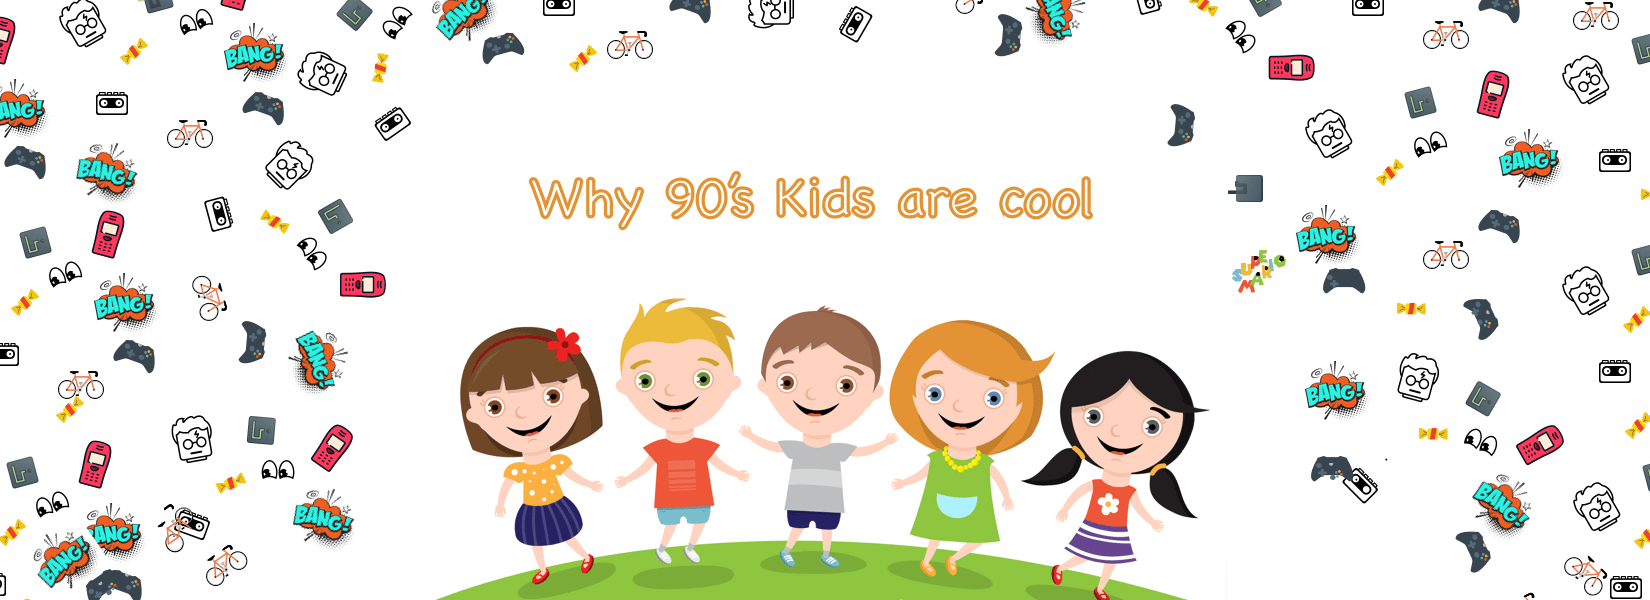 Why 90's kids are cool